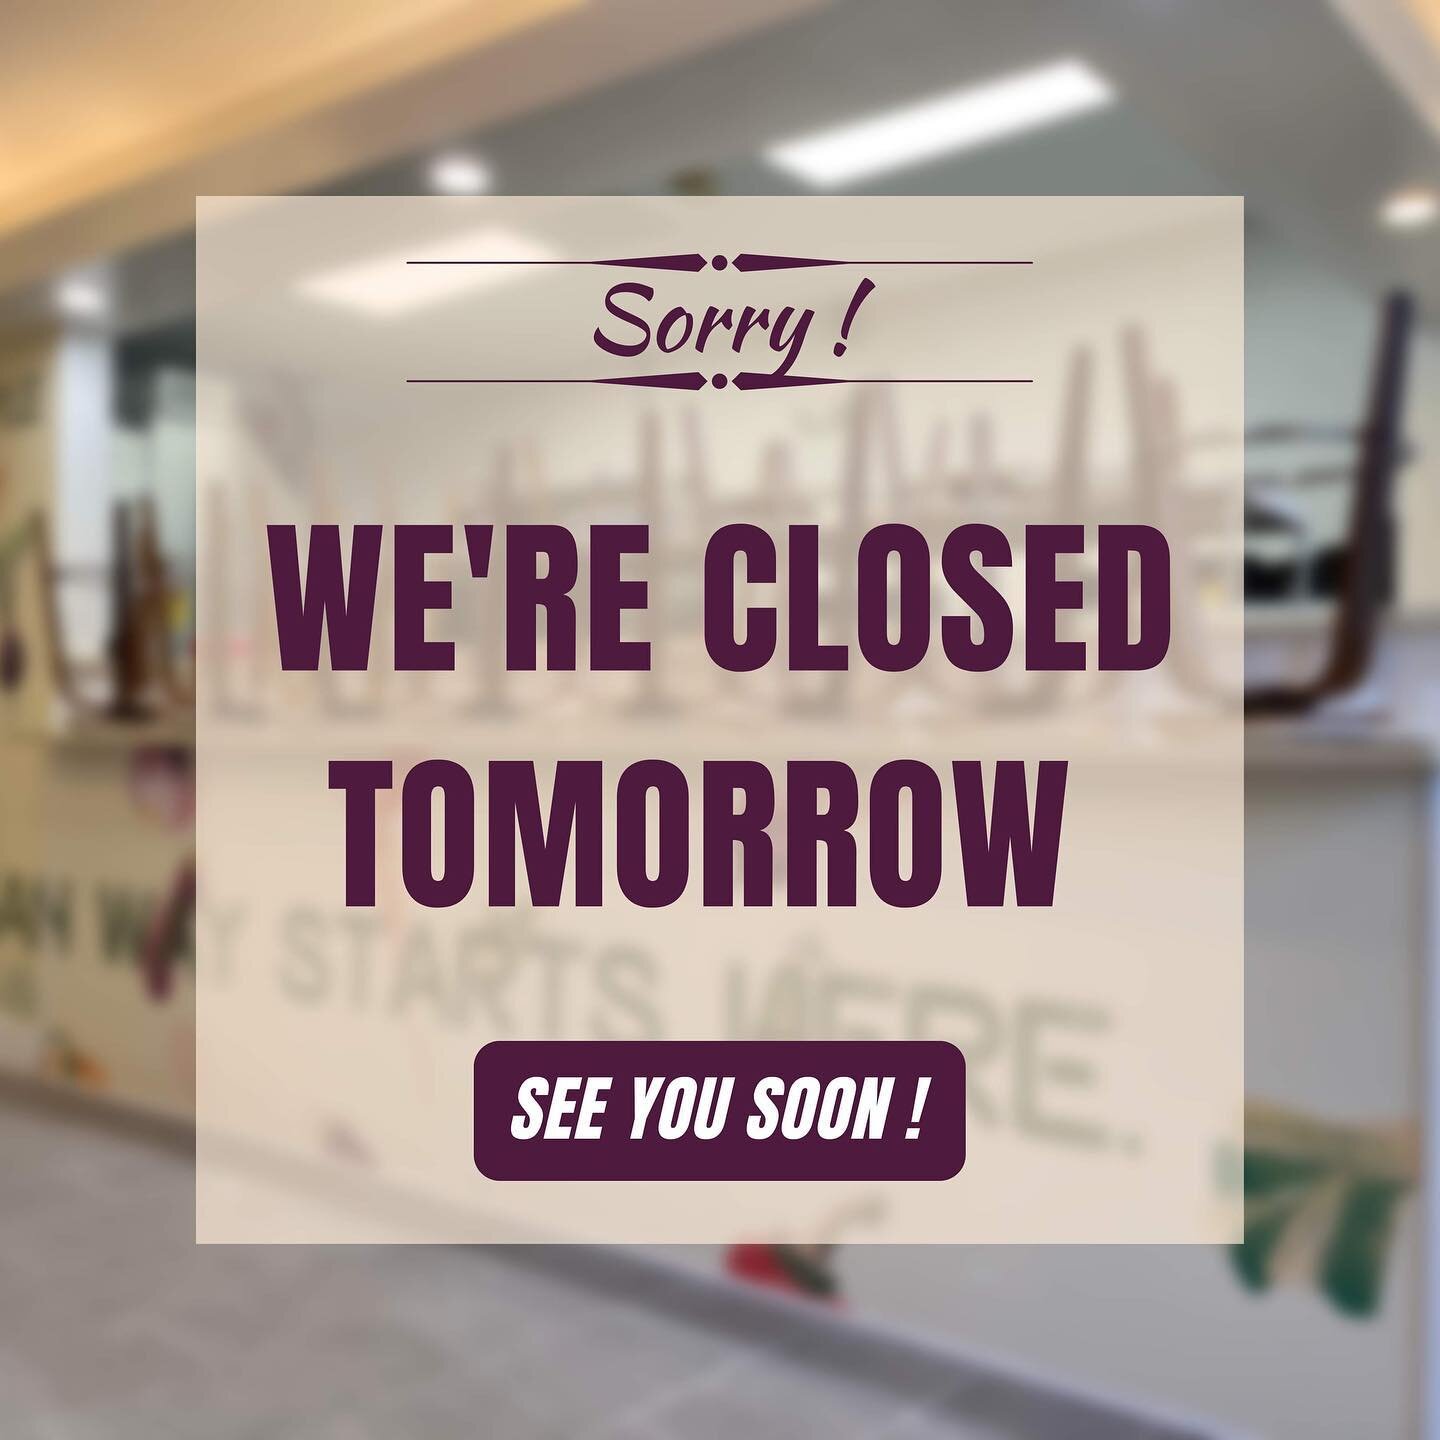 📣 Friendly Reminder! 📣

Our store will be closed tomorrow for a Private Party 🙏 before our Grand Opening on Saturday, 12th Nov.

✅ Dine-in, Pick-up &amp; Delivery will be available as usual today